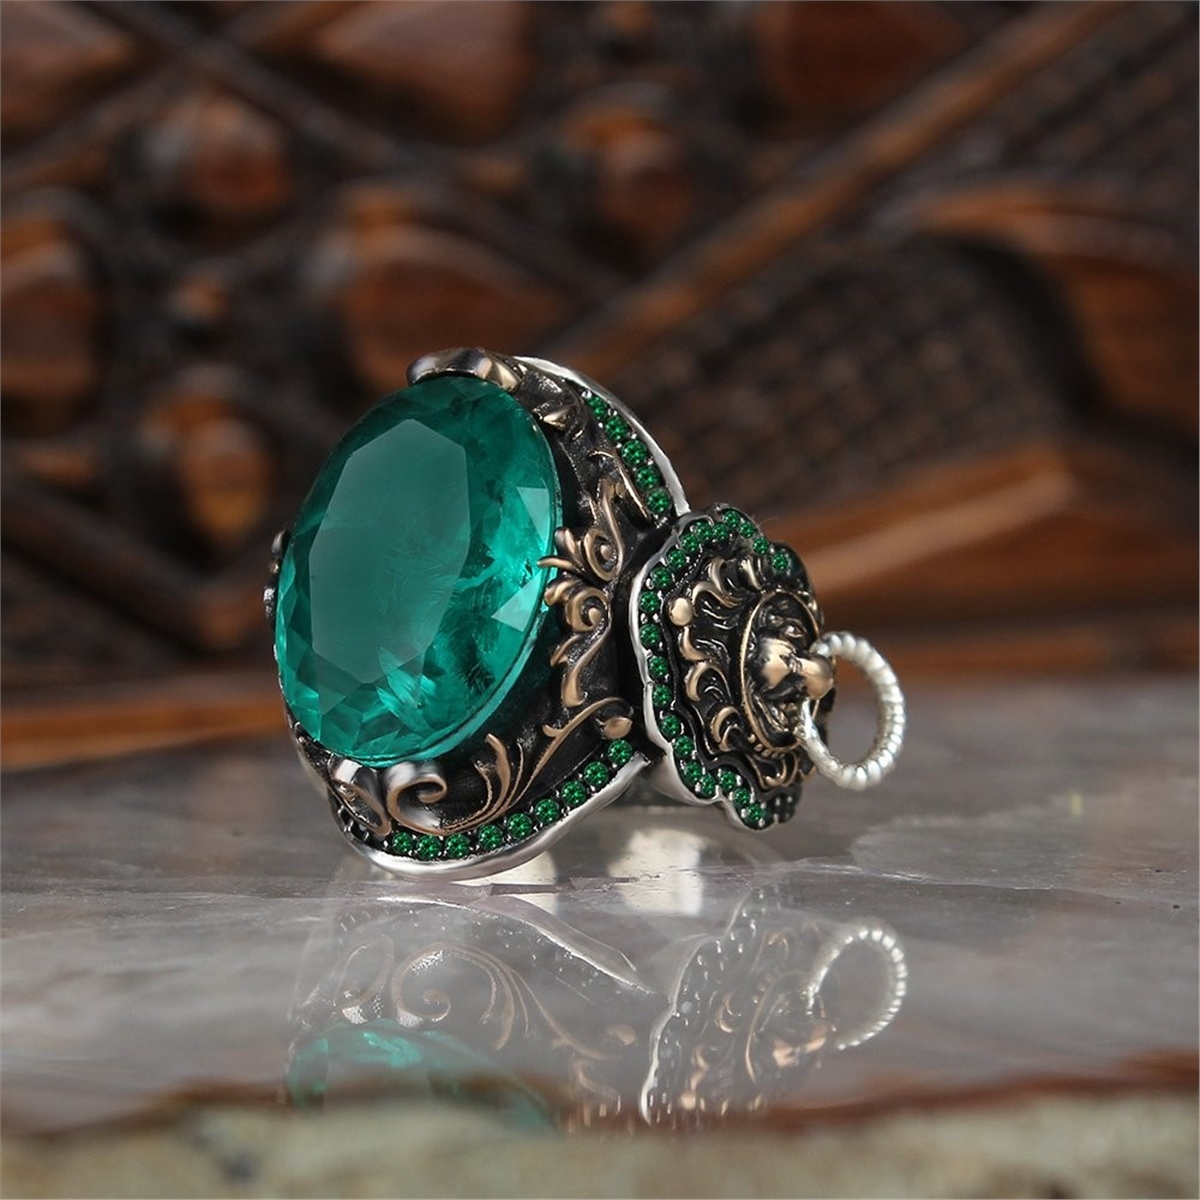 Lion Symbol 925 Sterling Silver Men's Ring with Paraiba Stone